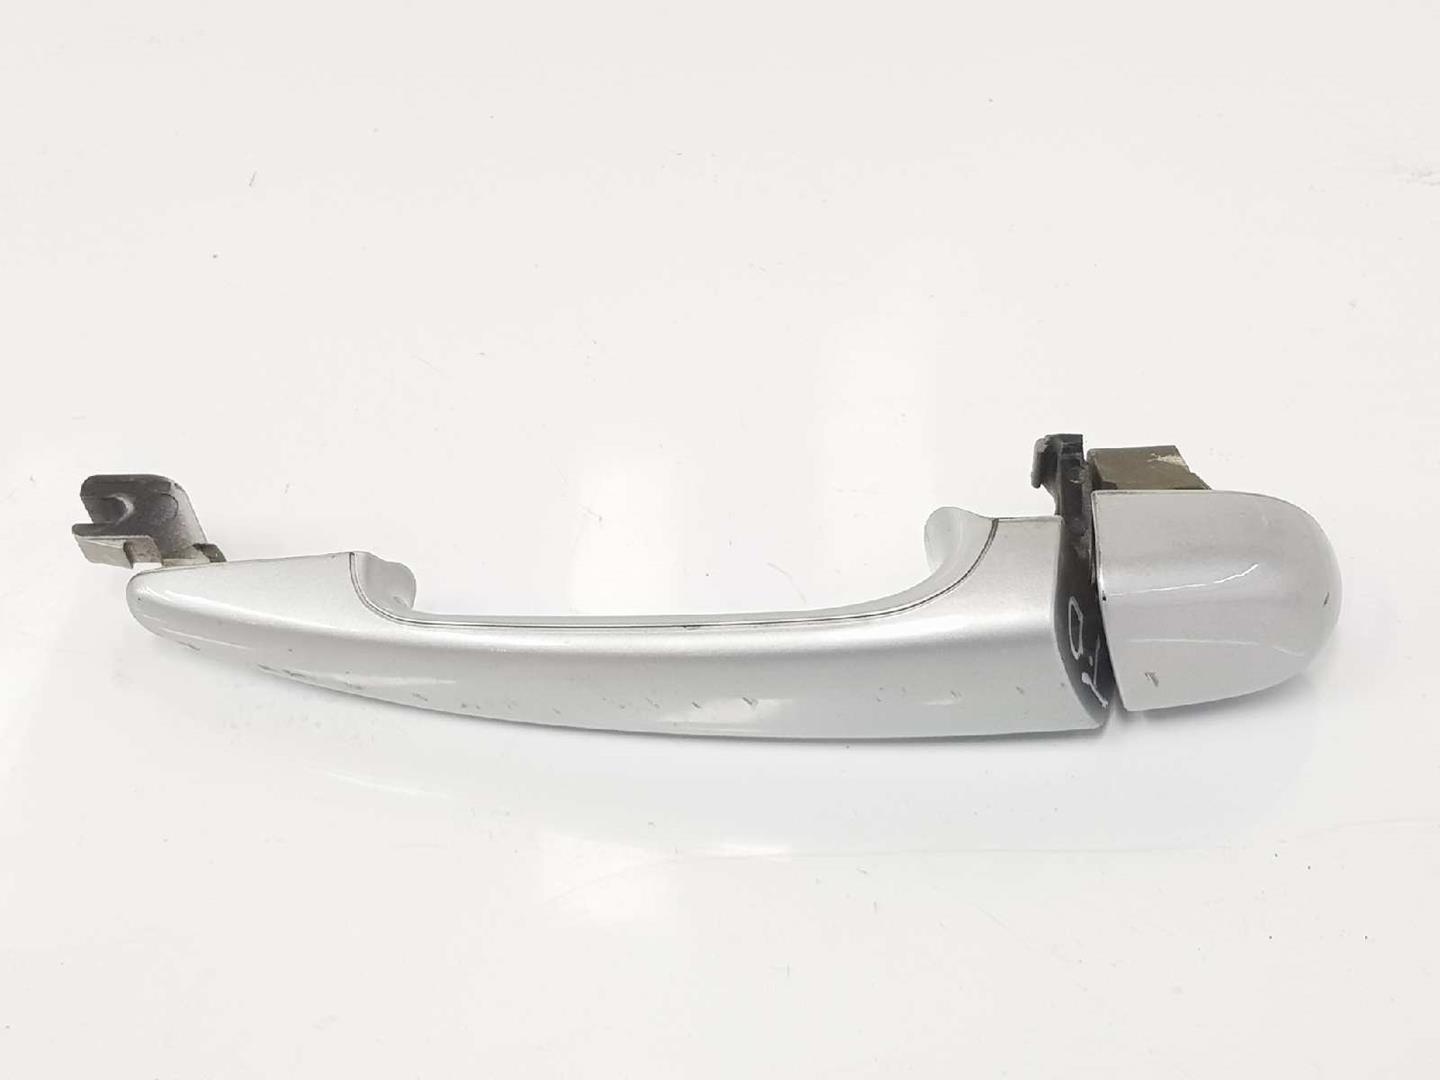 BMW 3 Series E46 (1997-2006) Rear right door outer handle 51218241398, 51218241398, GRIS354 19733930